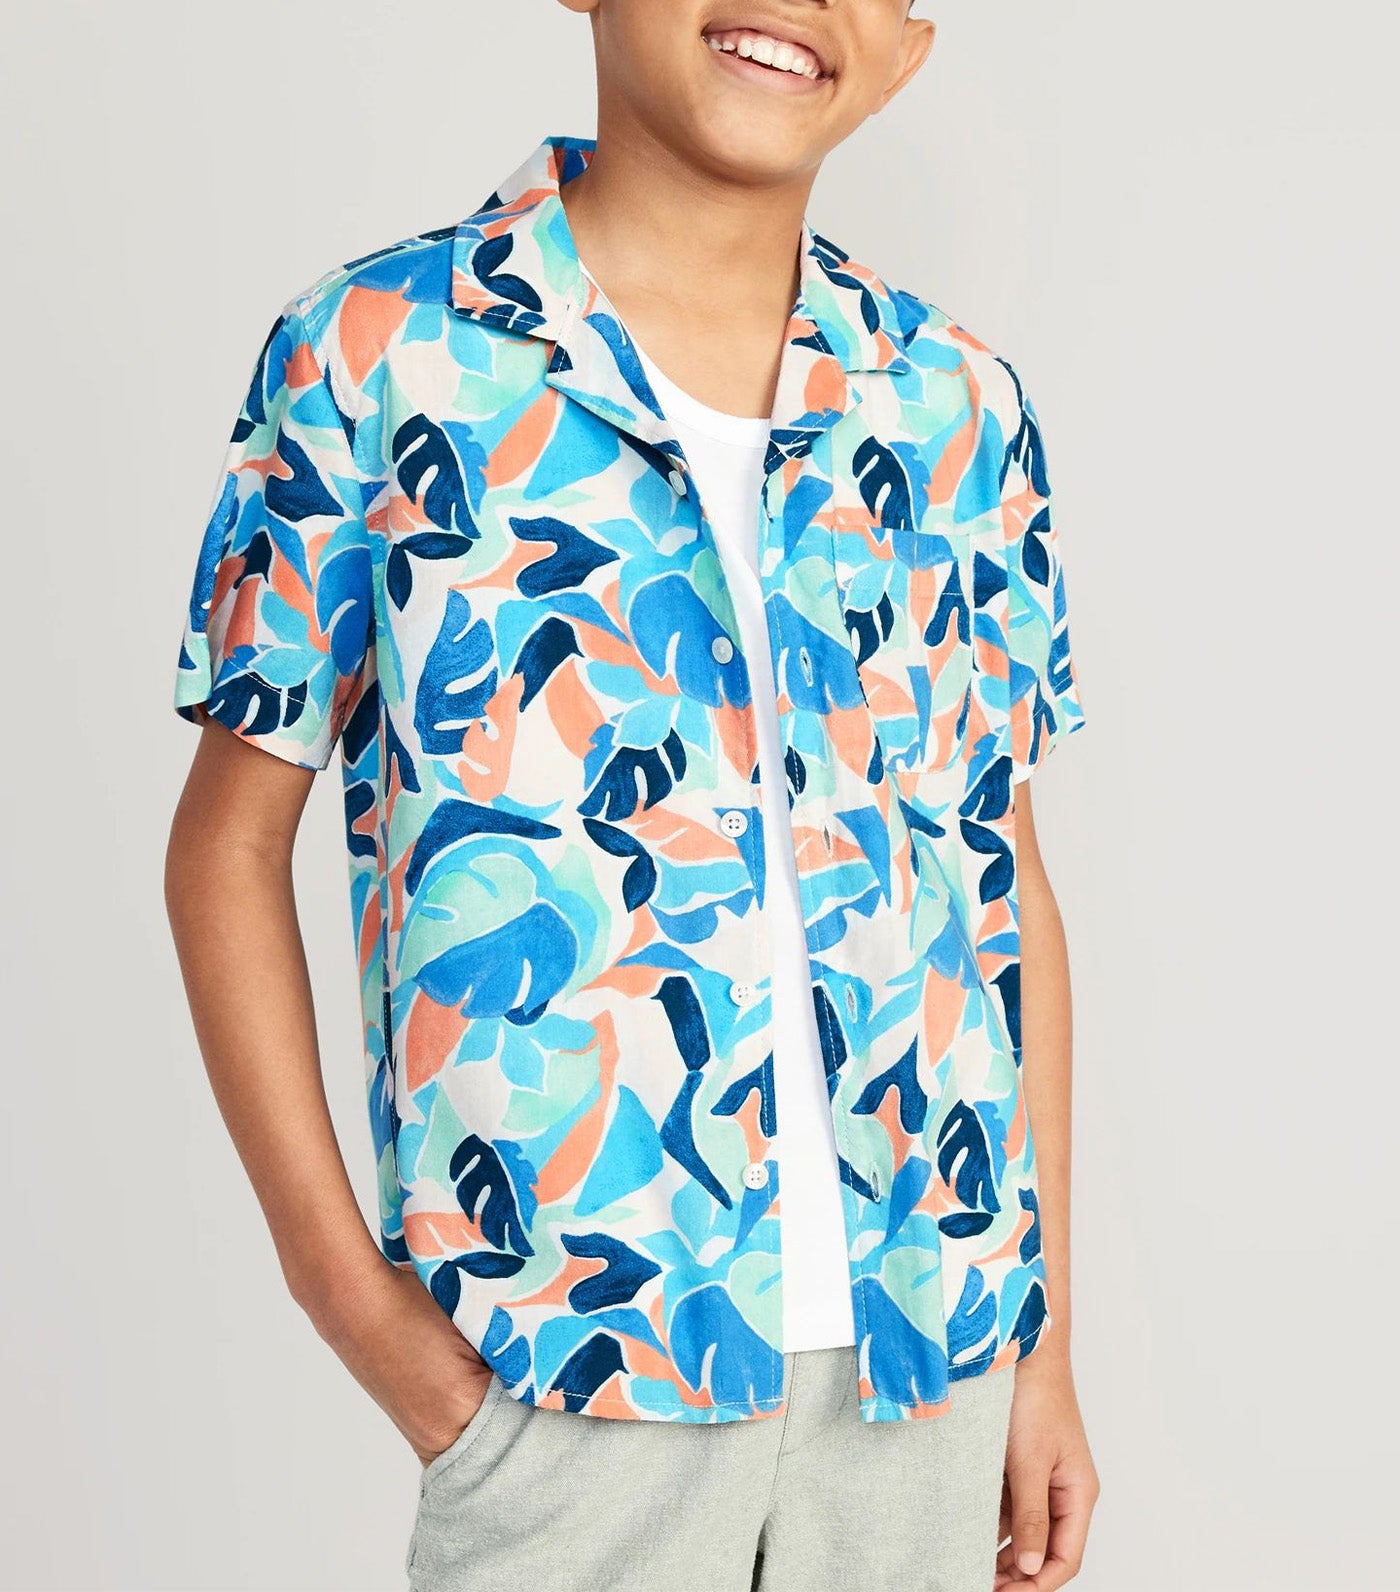 Short-Sleeve Printed Camp Shirt for Boys - Pink Multi Floral